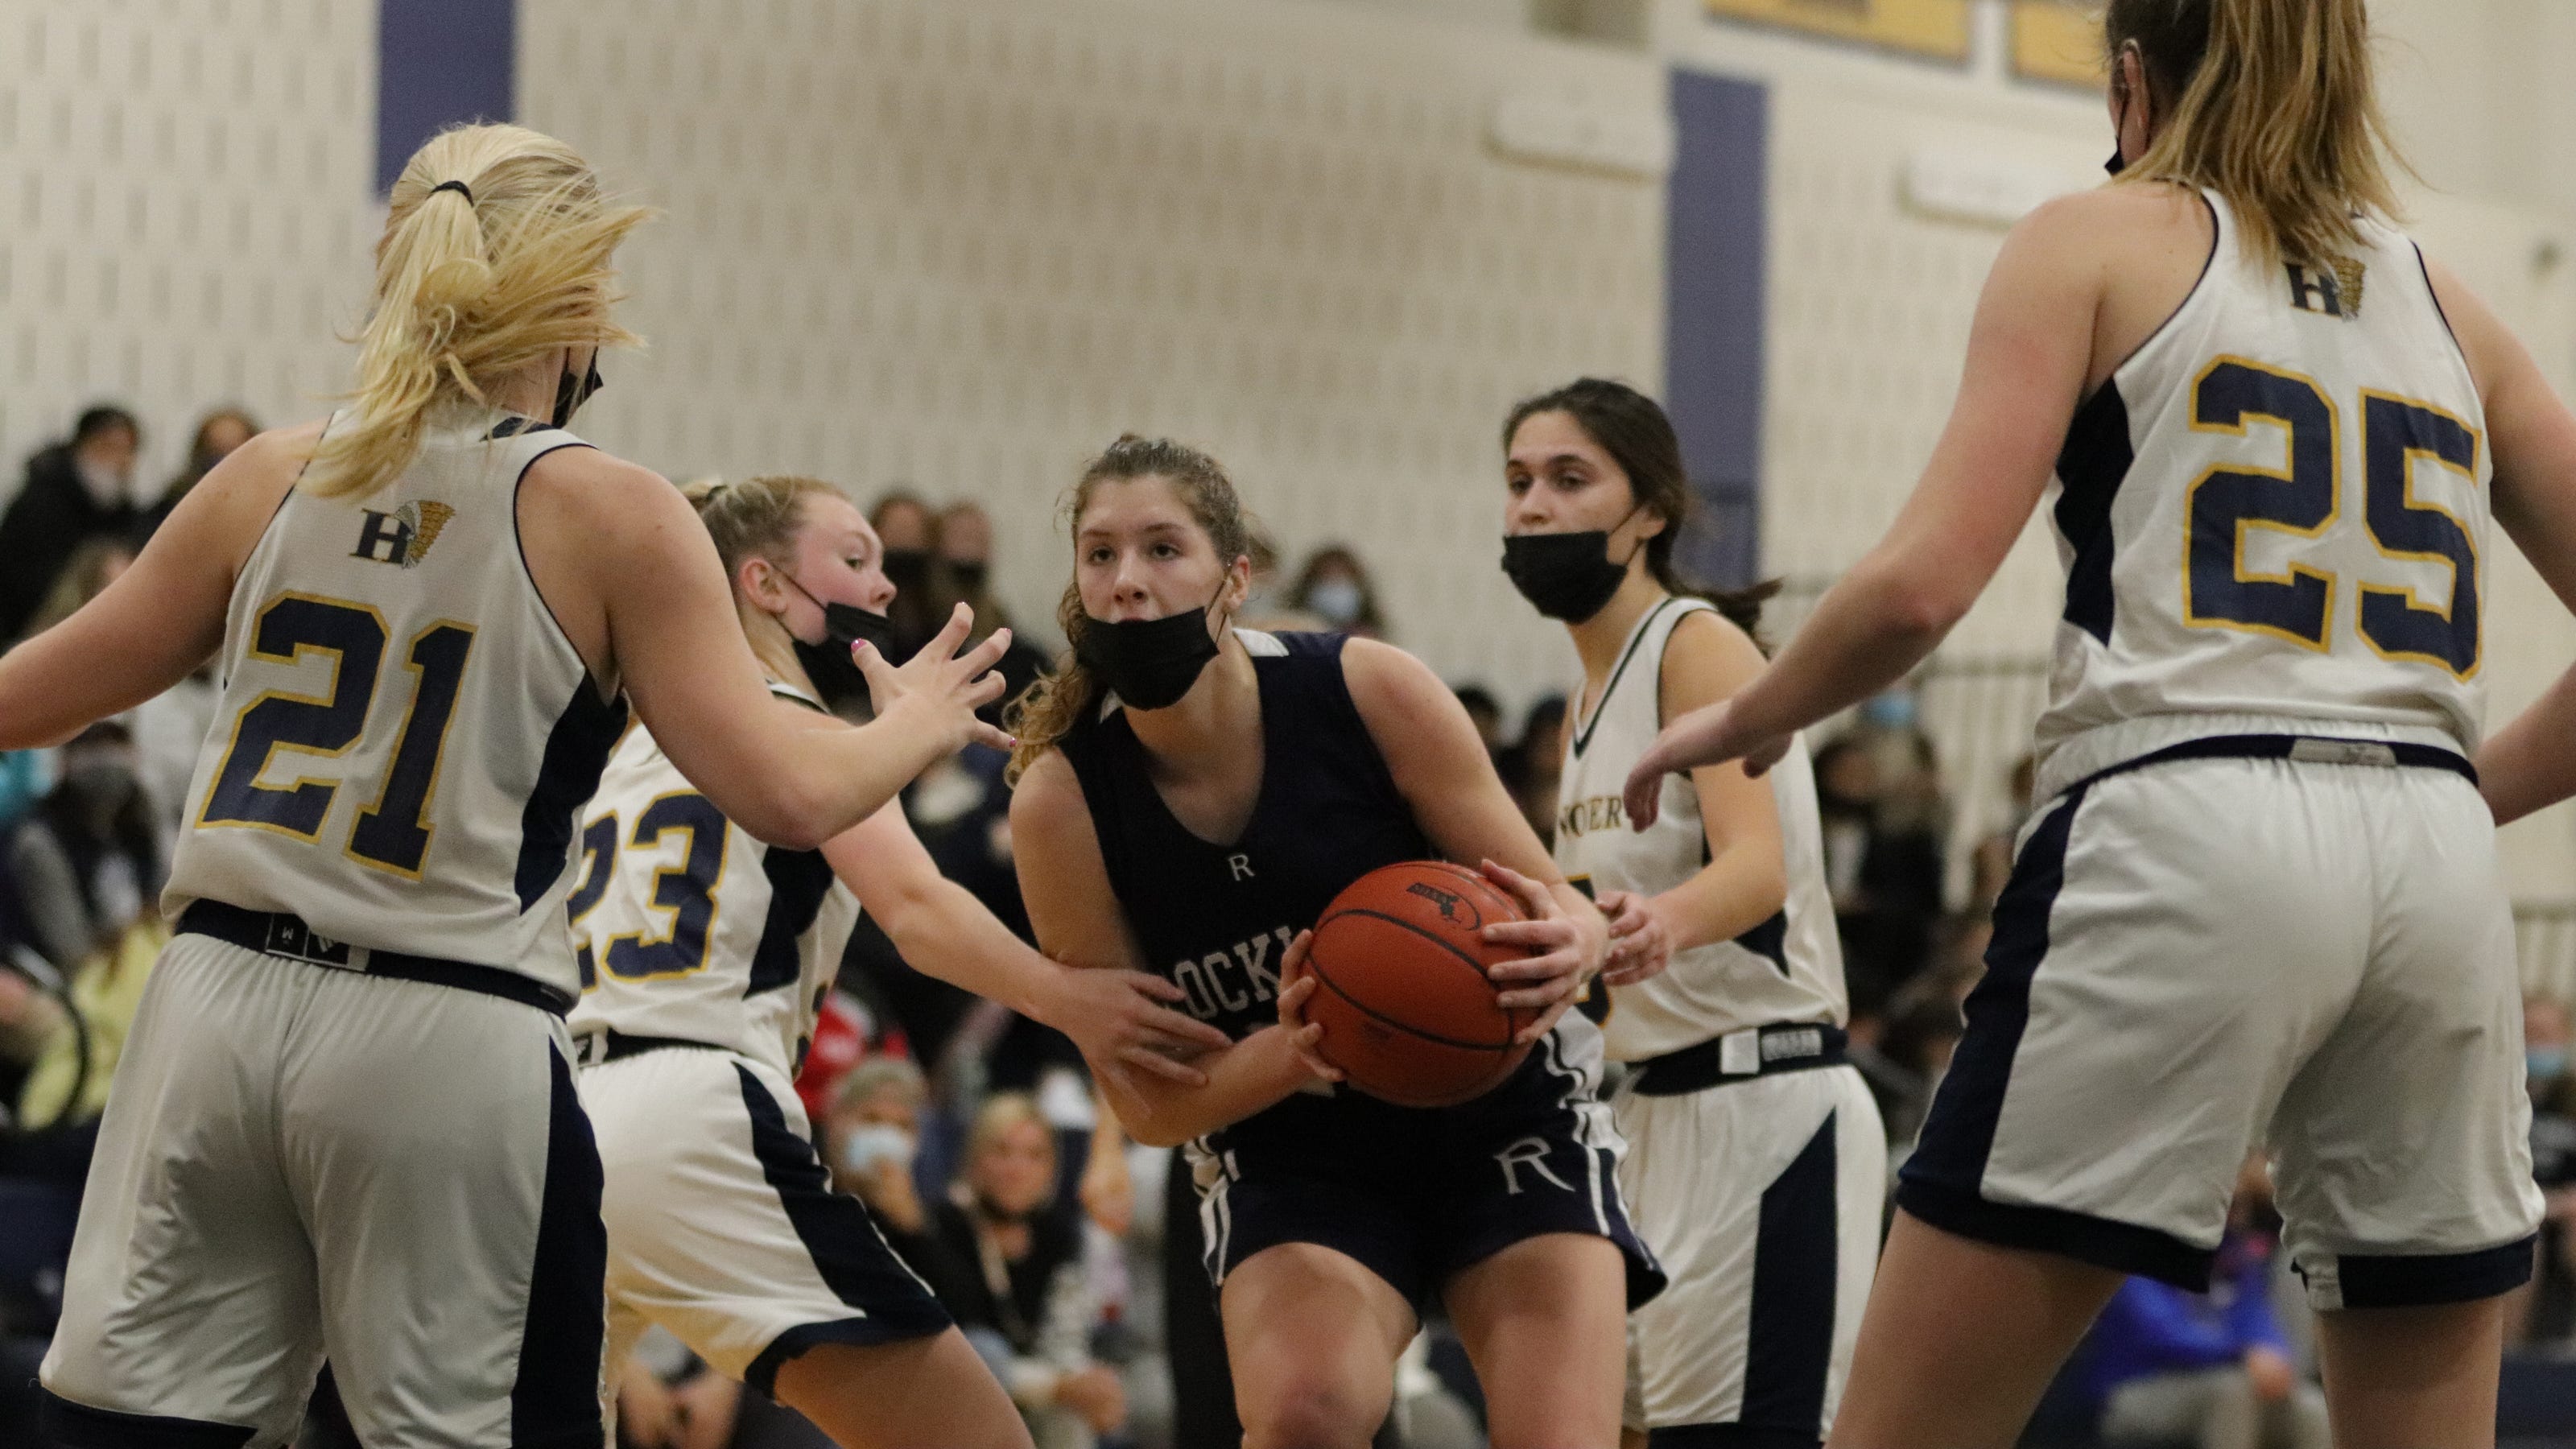 HIGH SCHOOL GIRLS BASKETBALL: With all eyes on Elie, Rockland sets another high standard